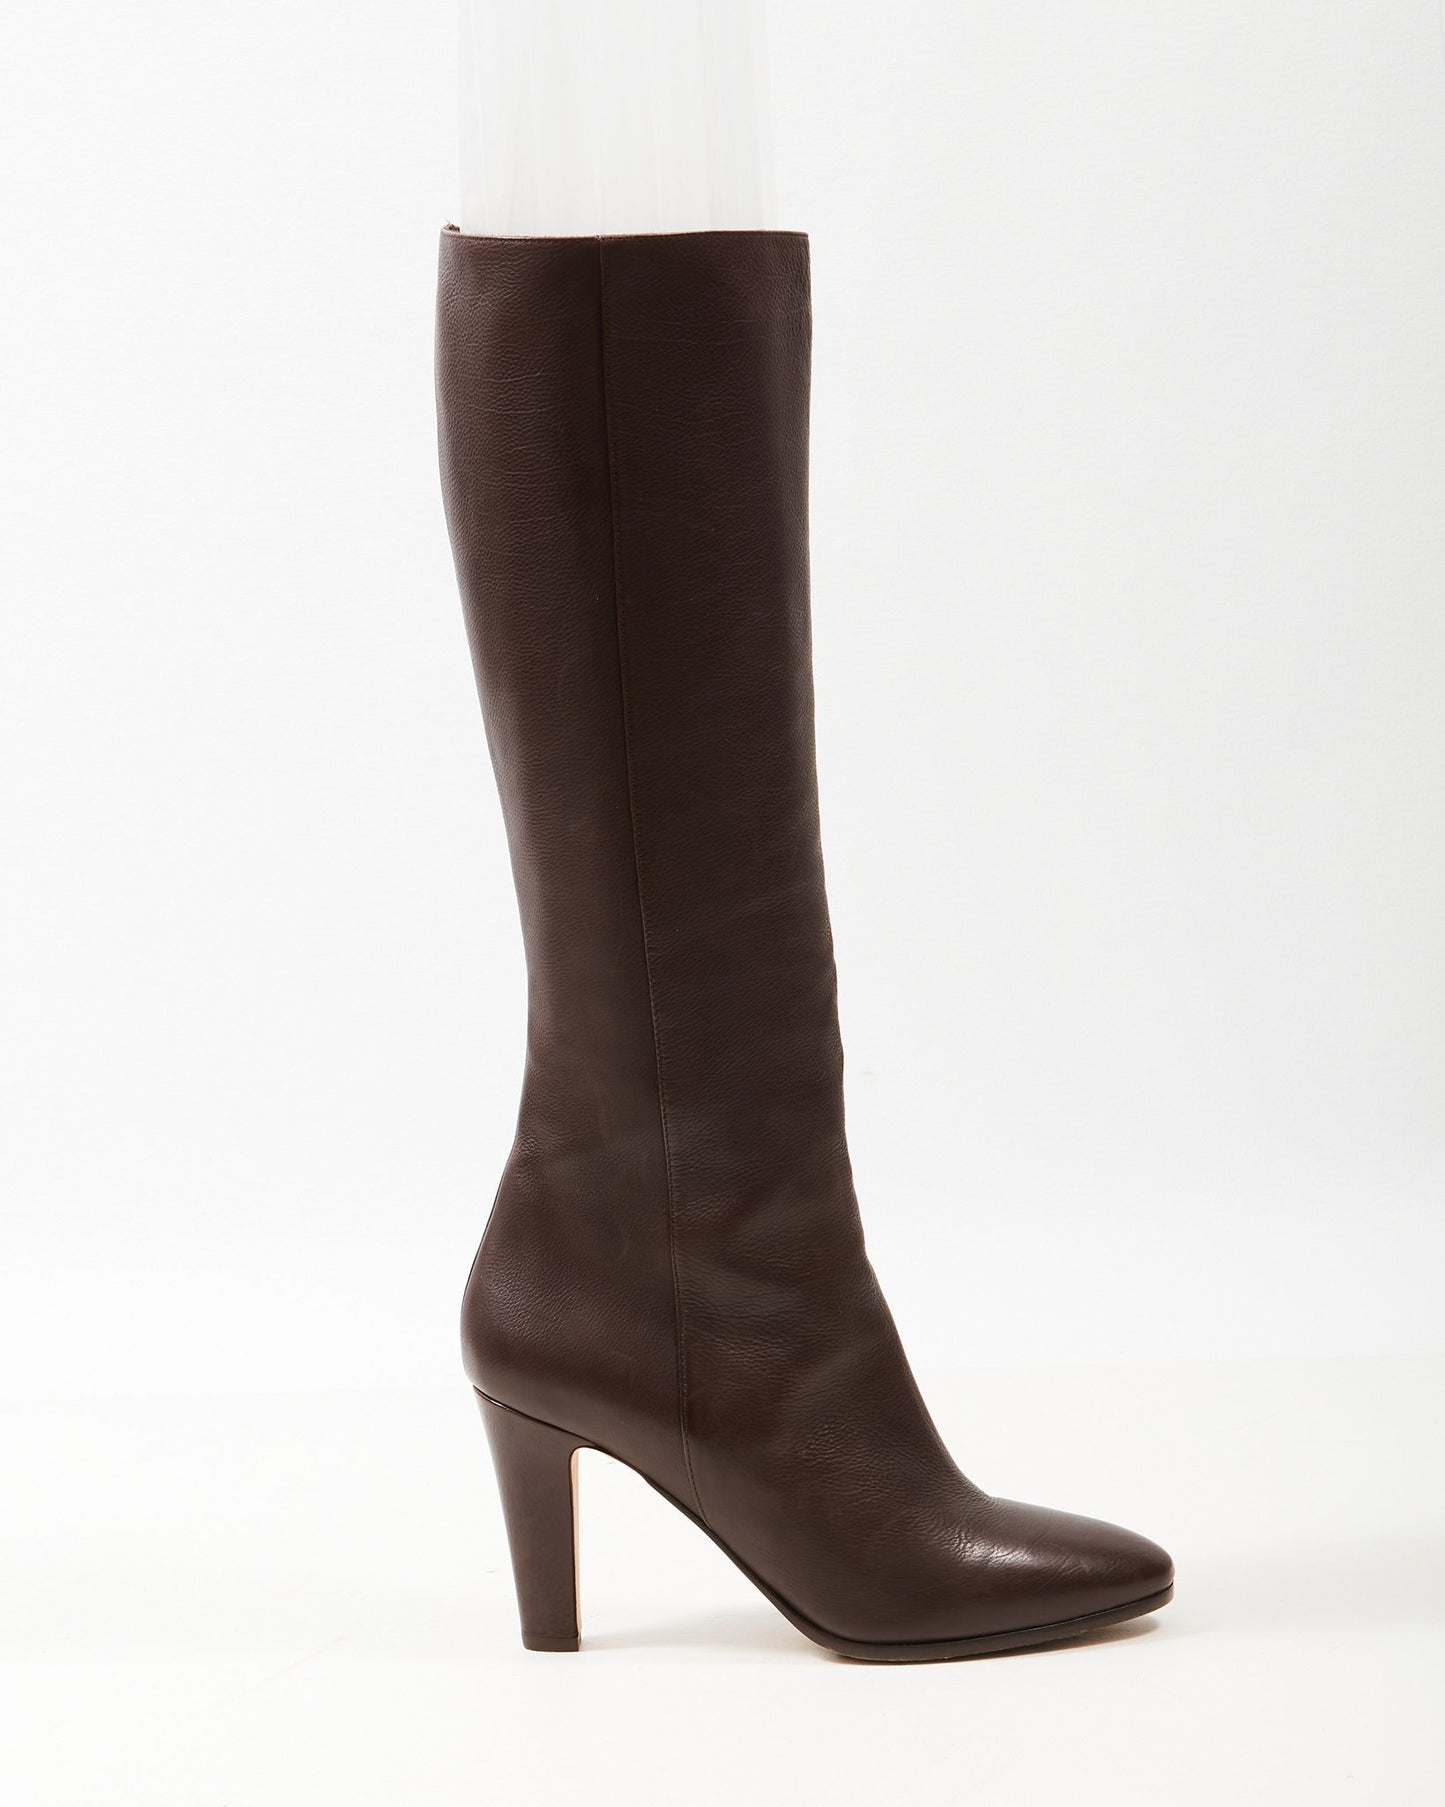 Jimmy Choo Brown Leather Knee-High Heeled Boots - 39.5